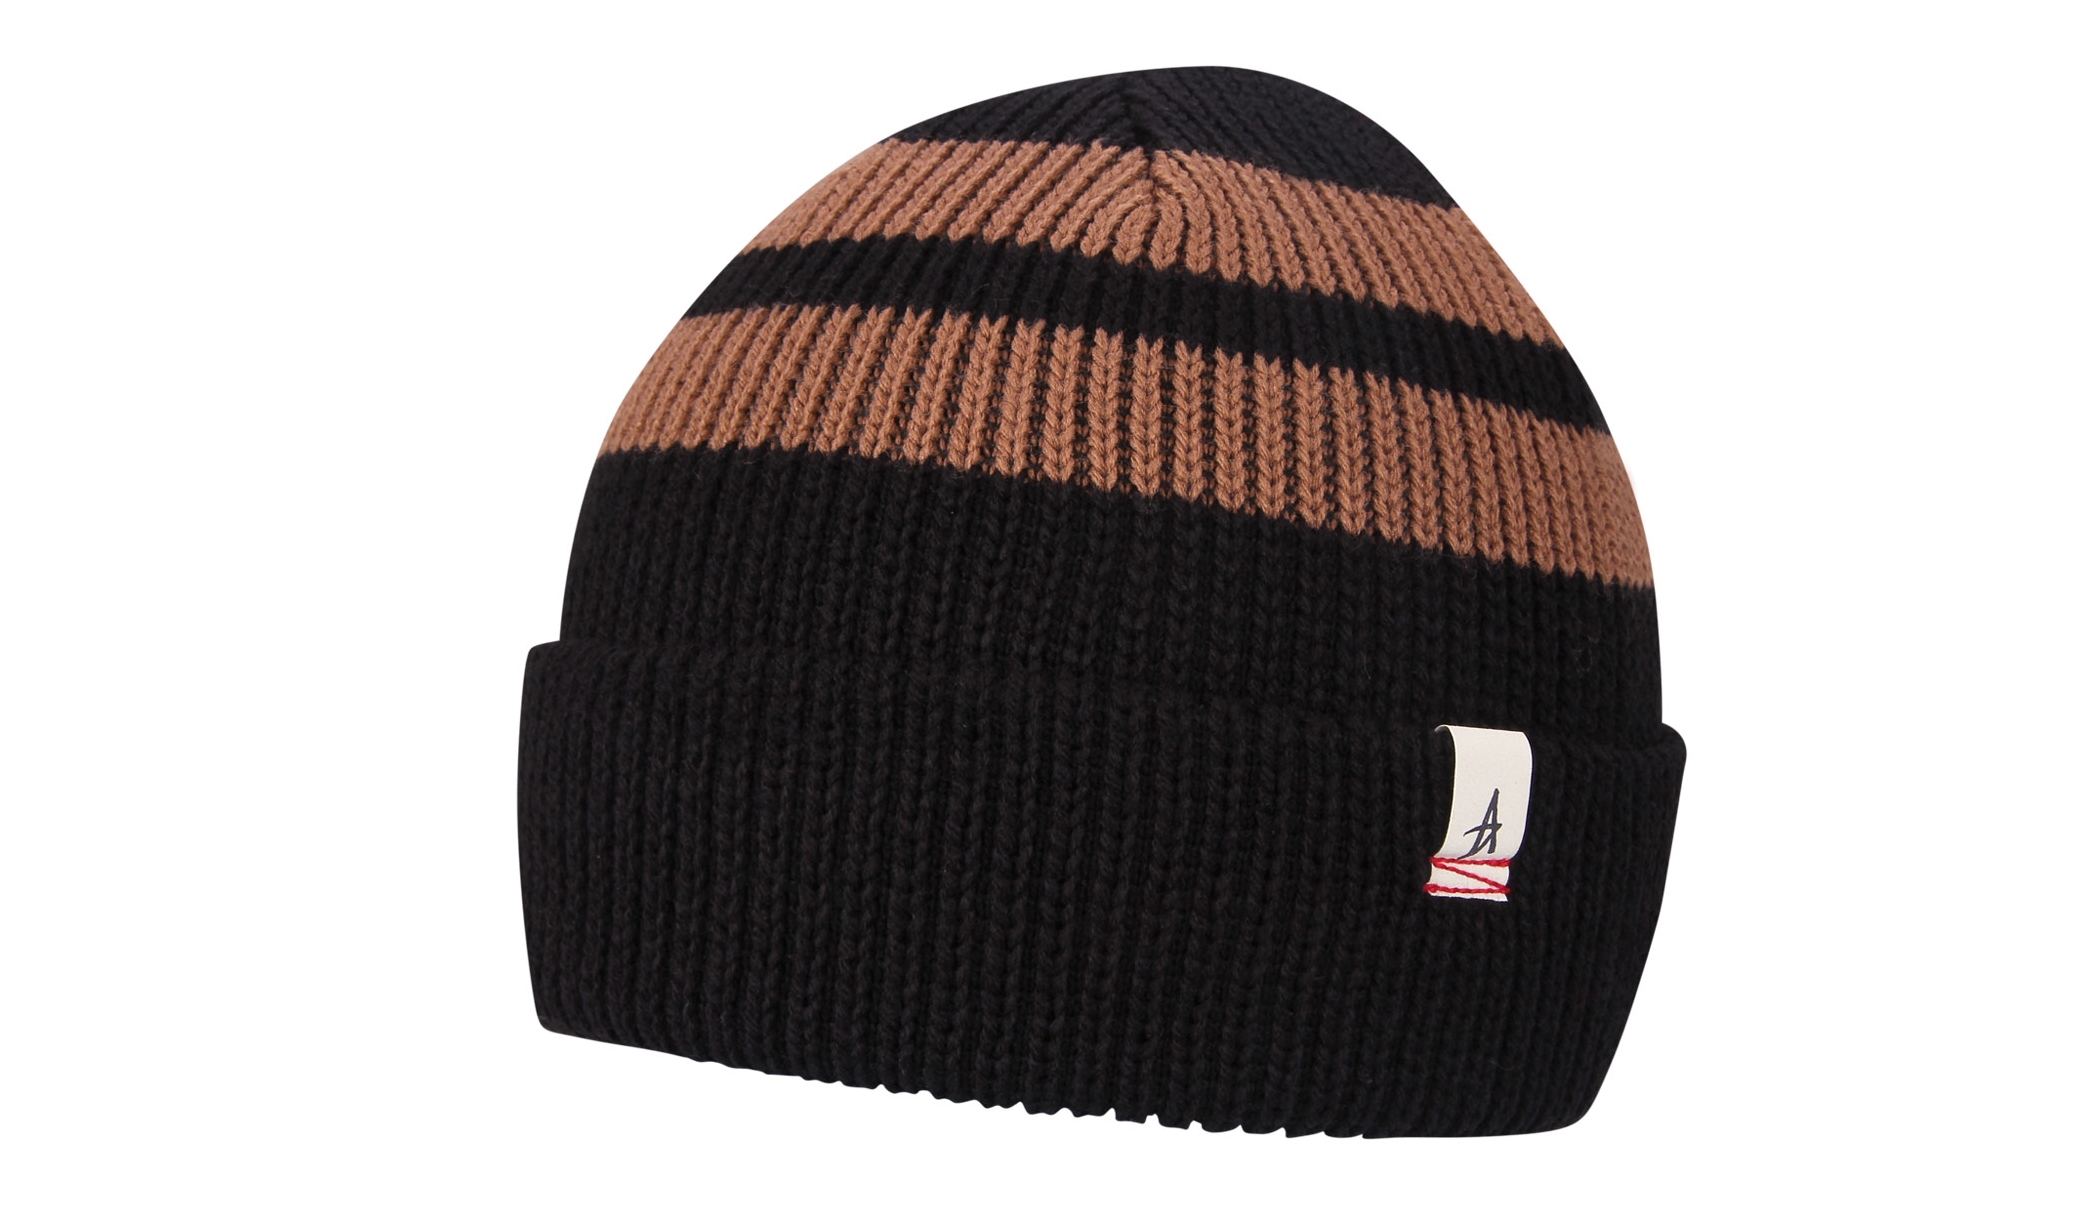 Gorro Altamont Cell Block - R$ 99,90, na Netshoes